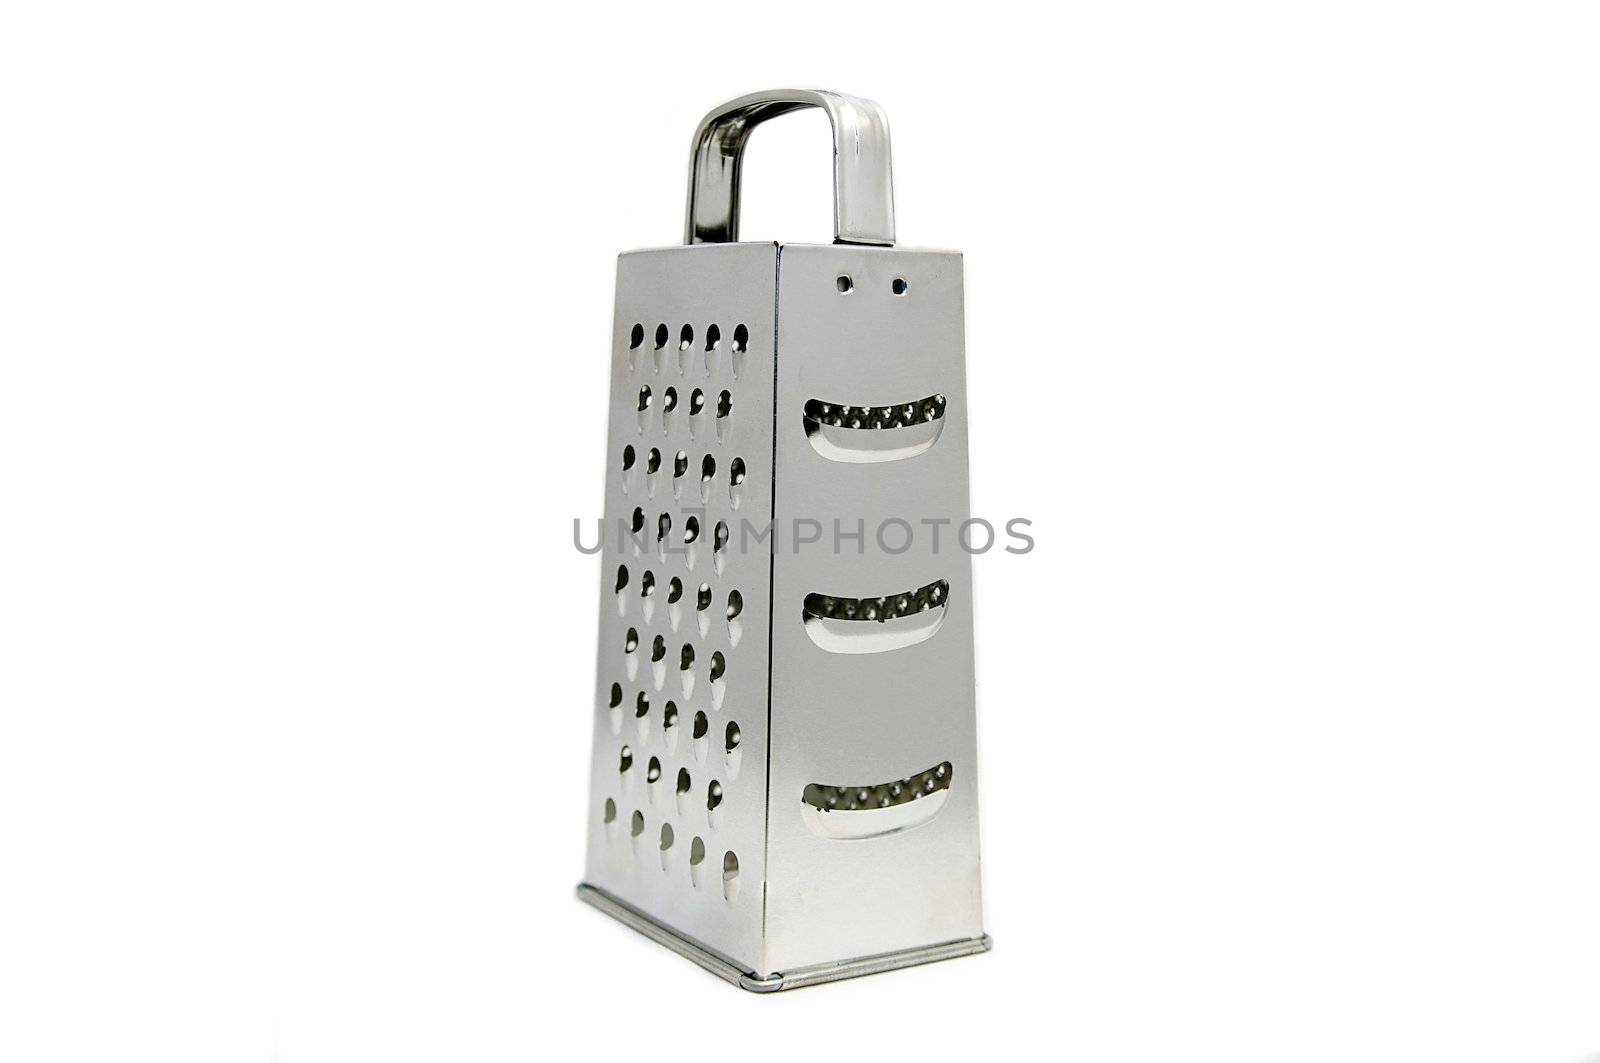 metal grater by Lester120